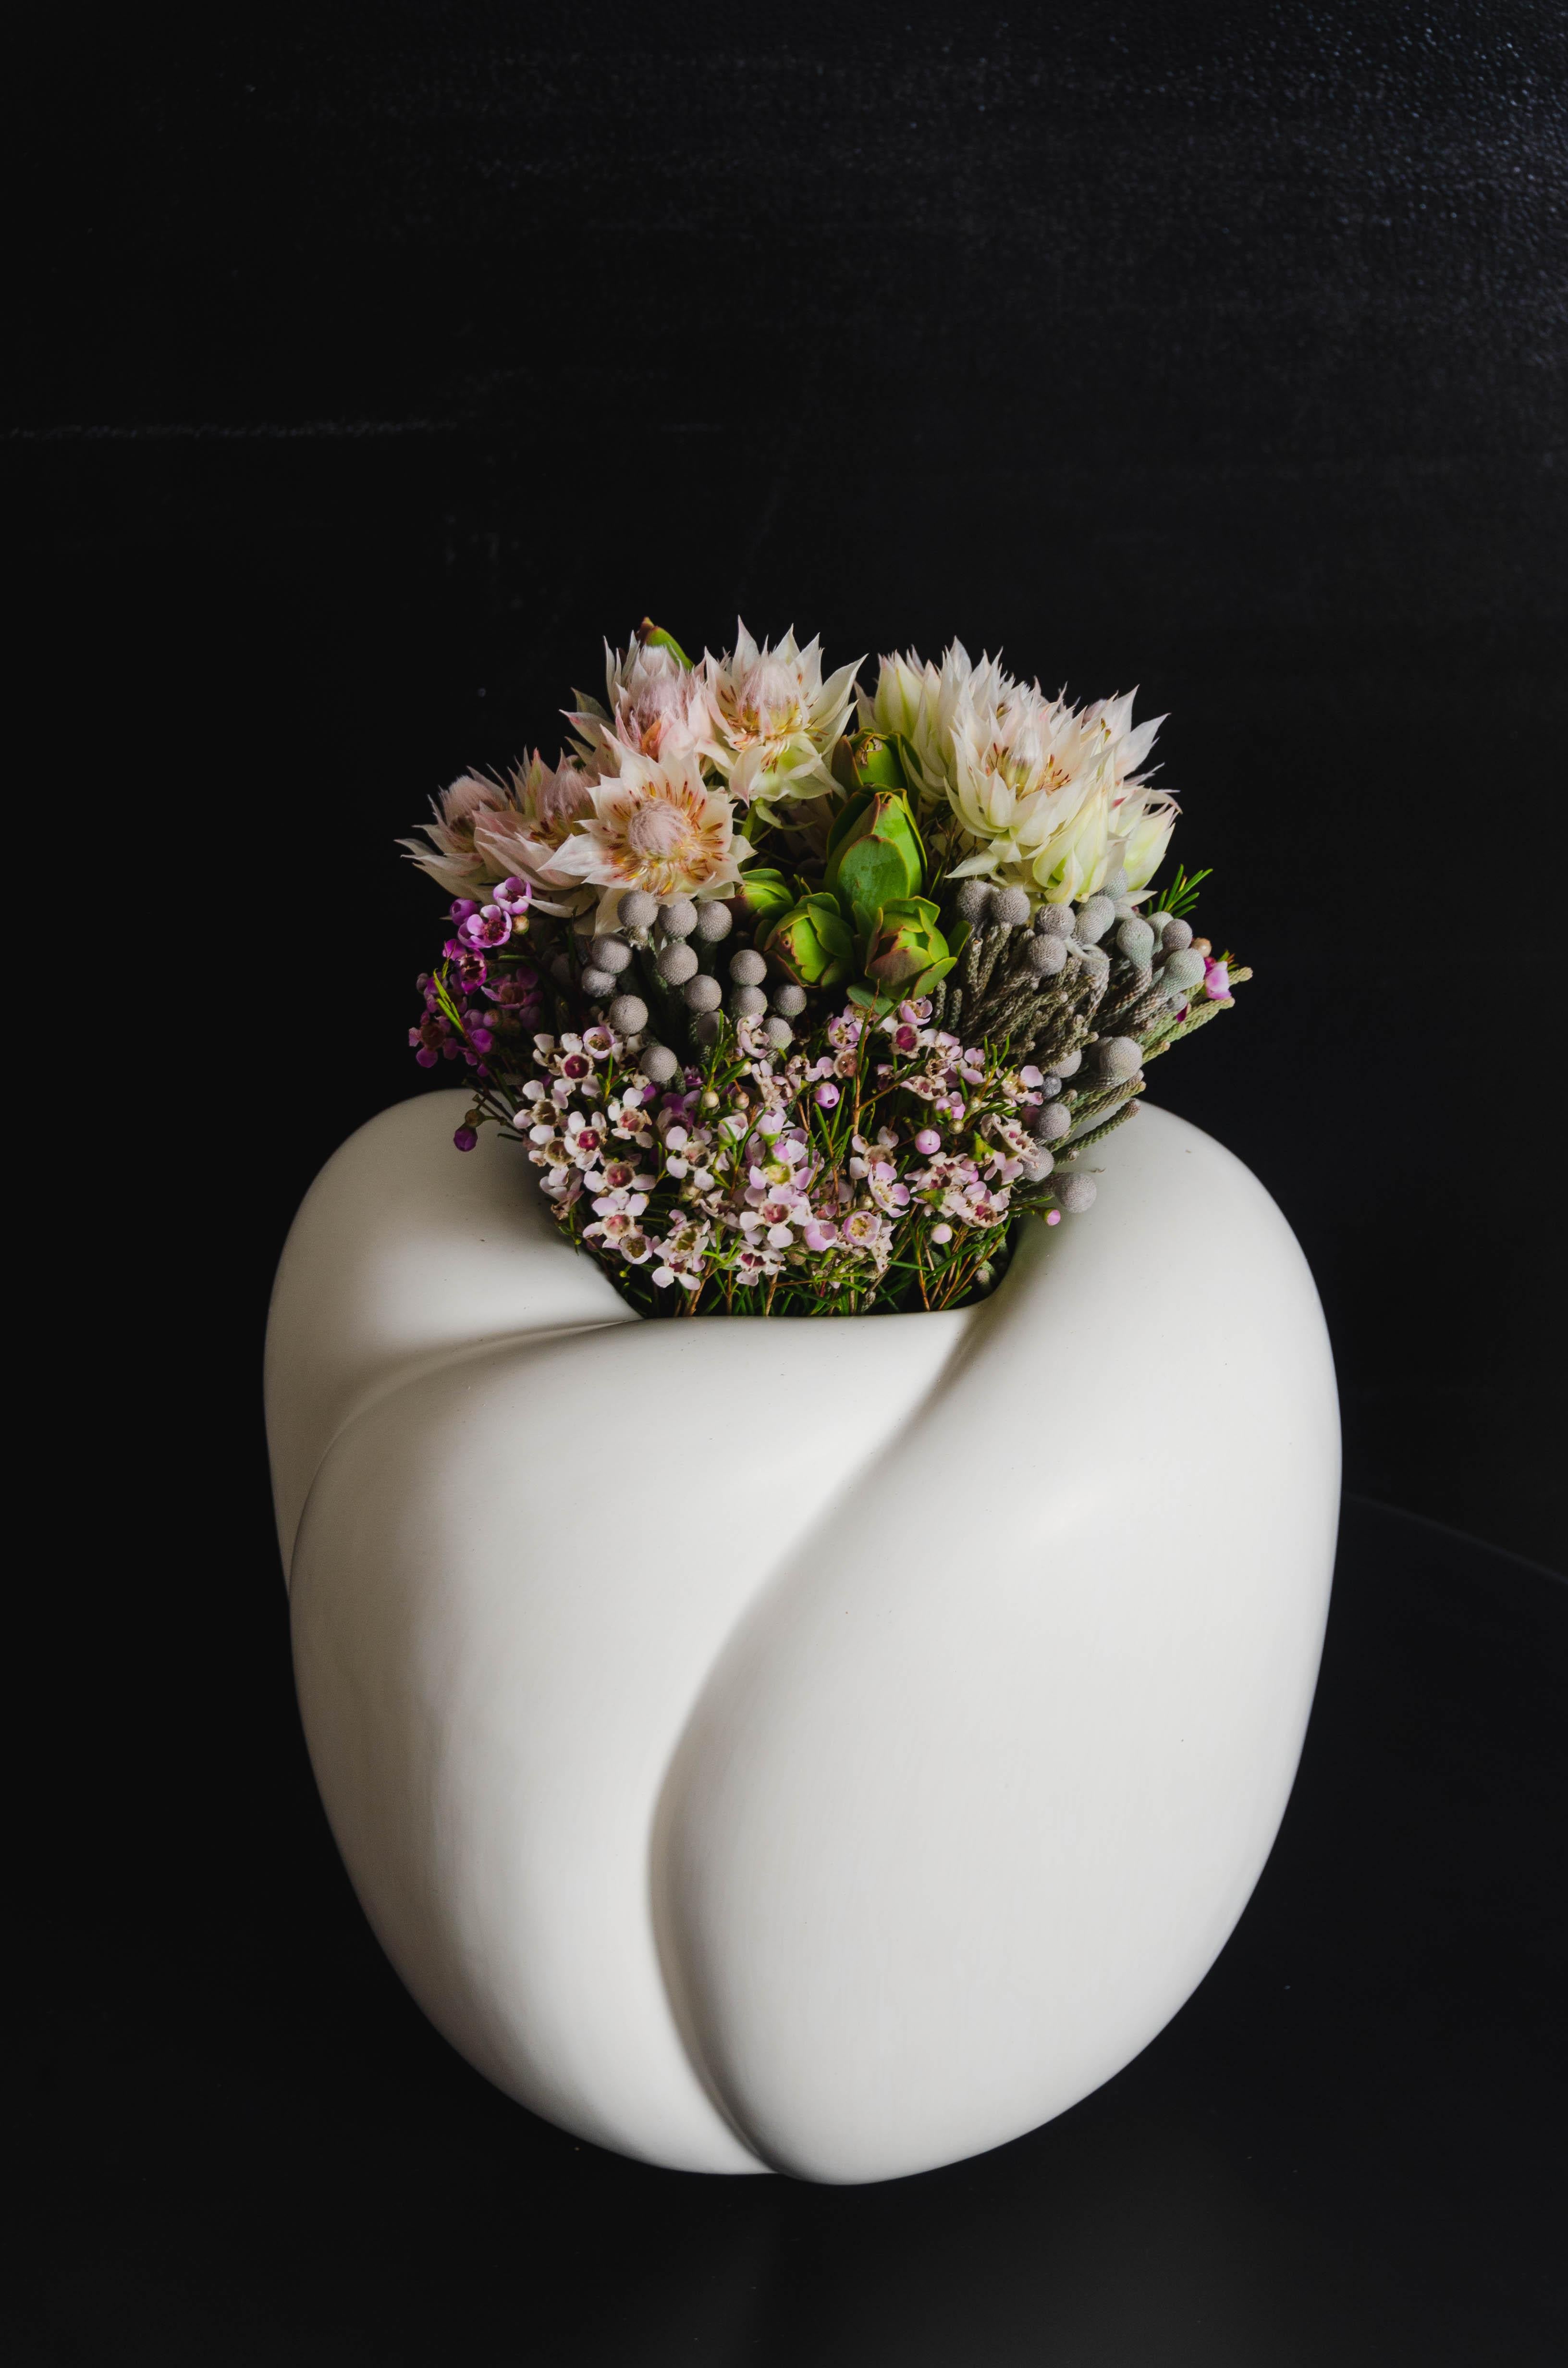 Contemporary Four Petal Cream Lacquer Pot by Robert Kuo, Limited Edition For Sale